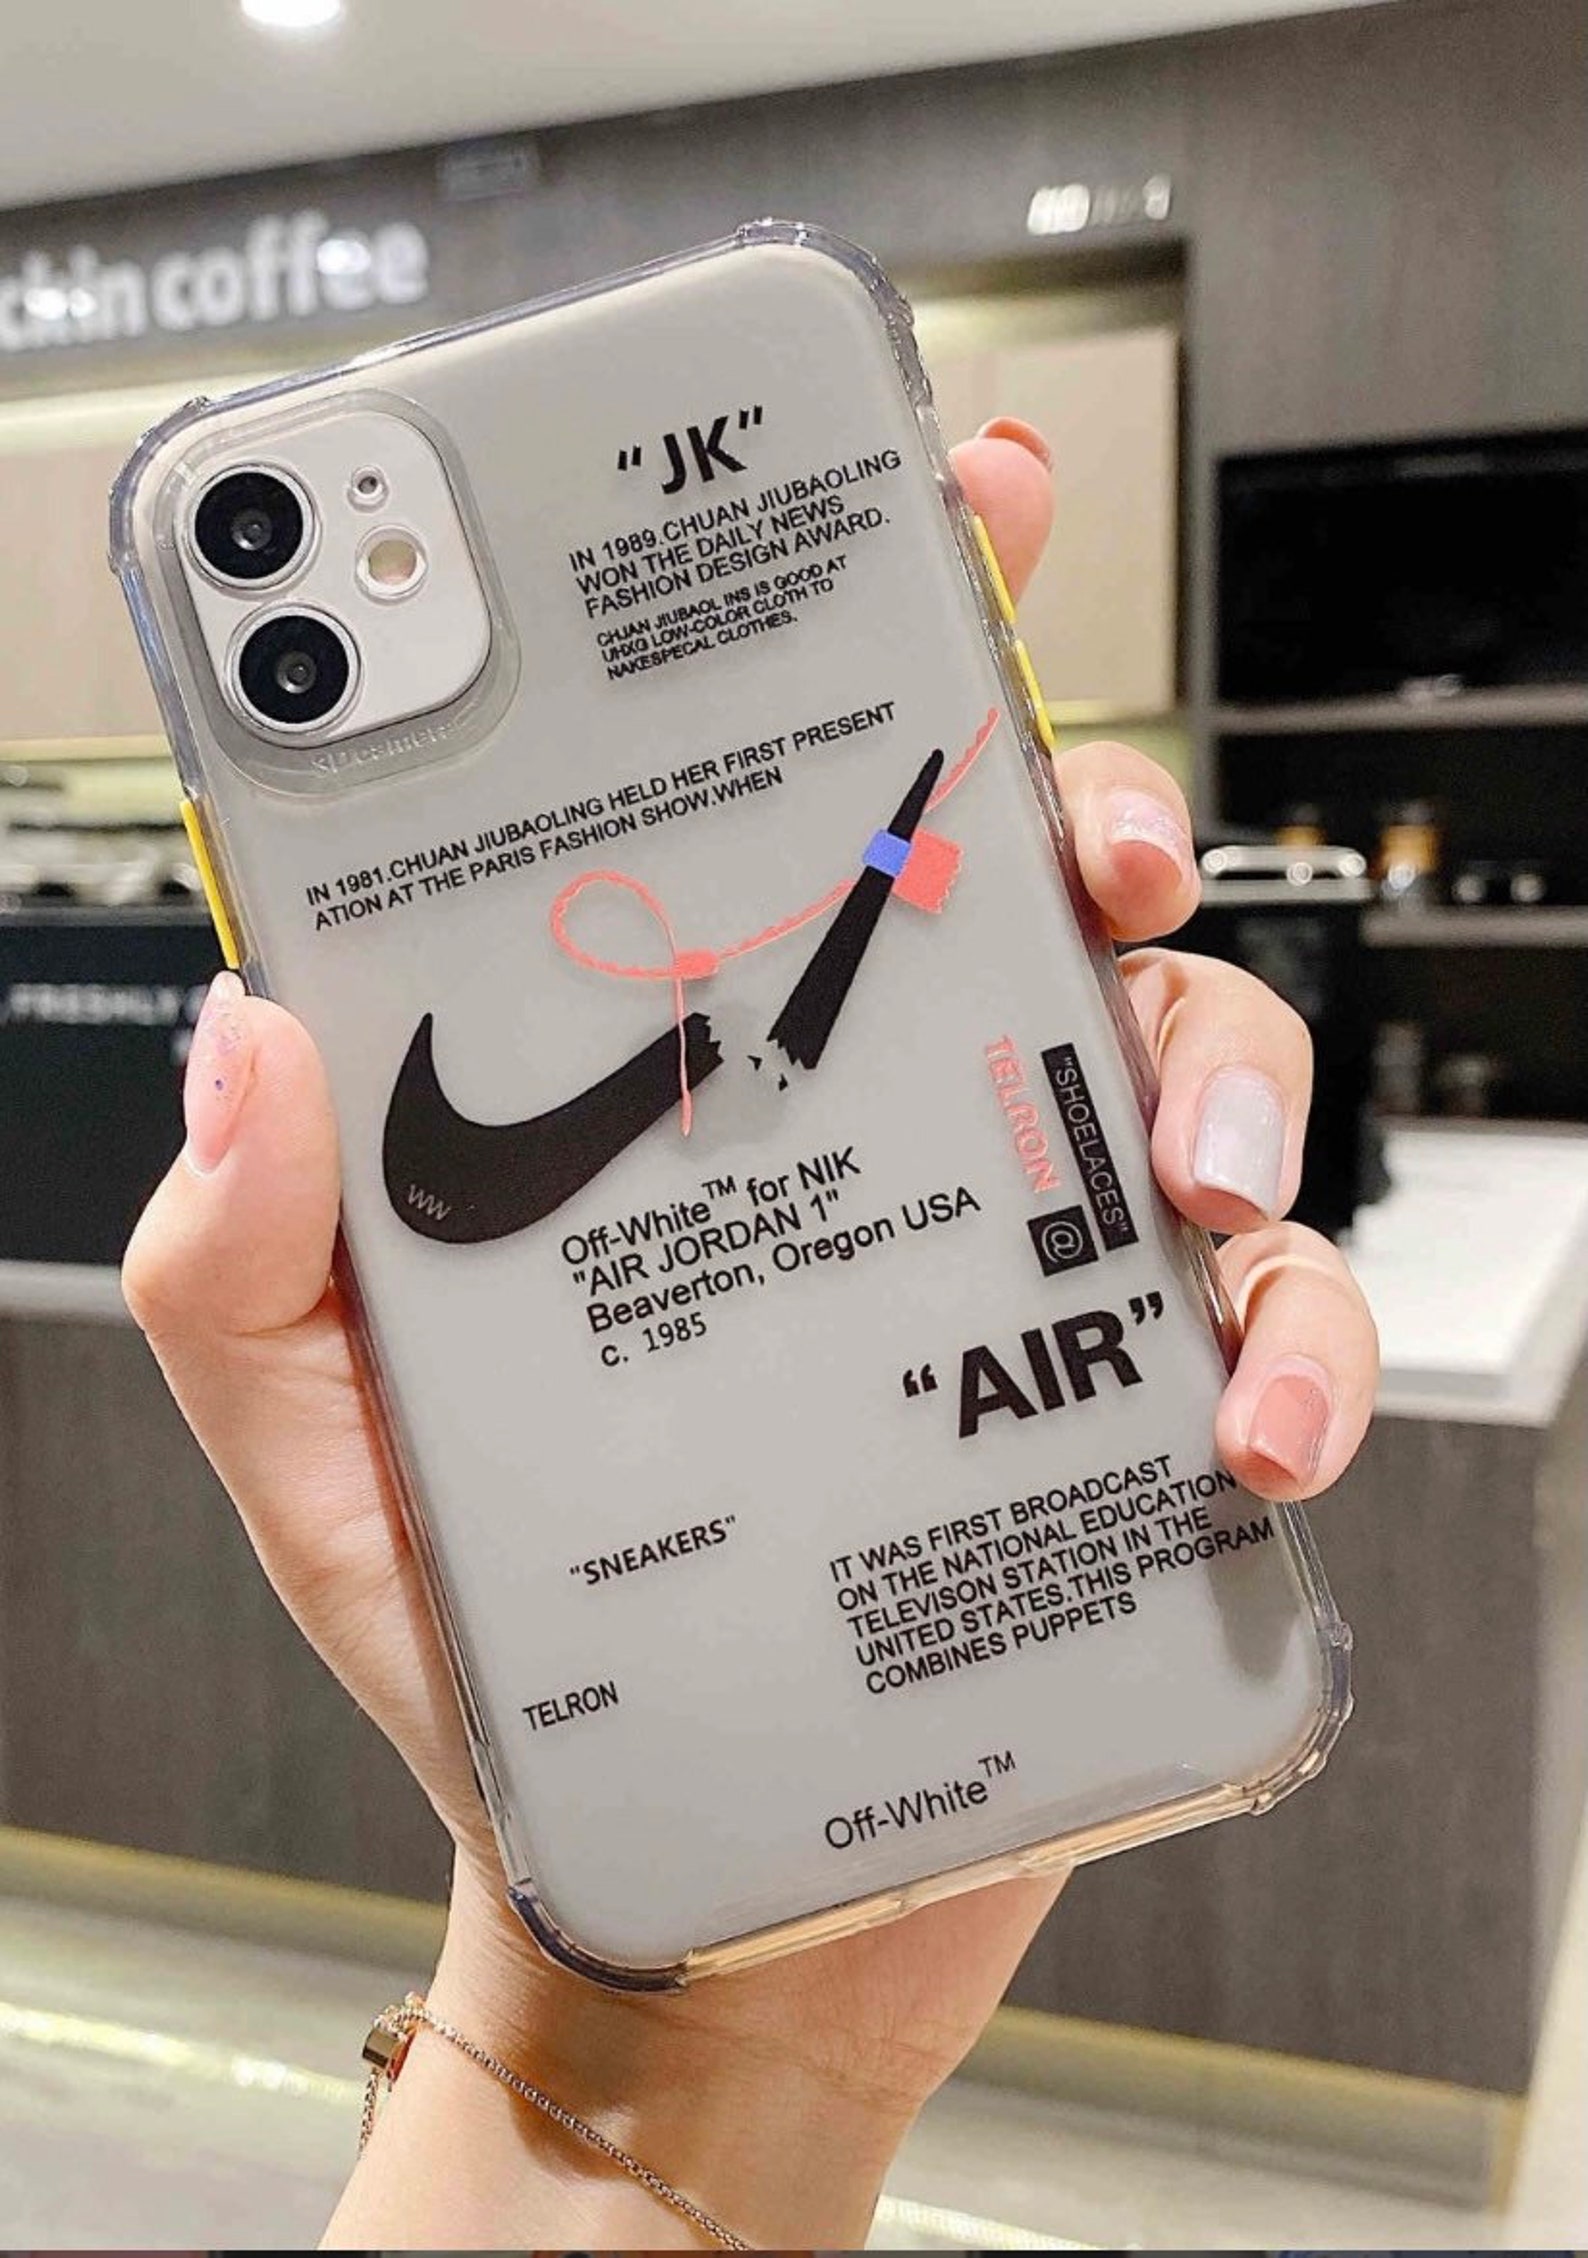 Nike Air Off White Jk Fashion Design Case for IPhone 12 12 | Etsy